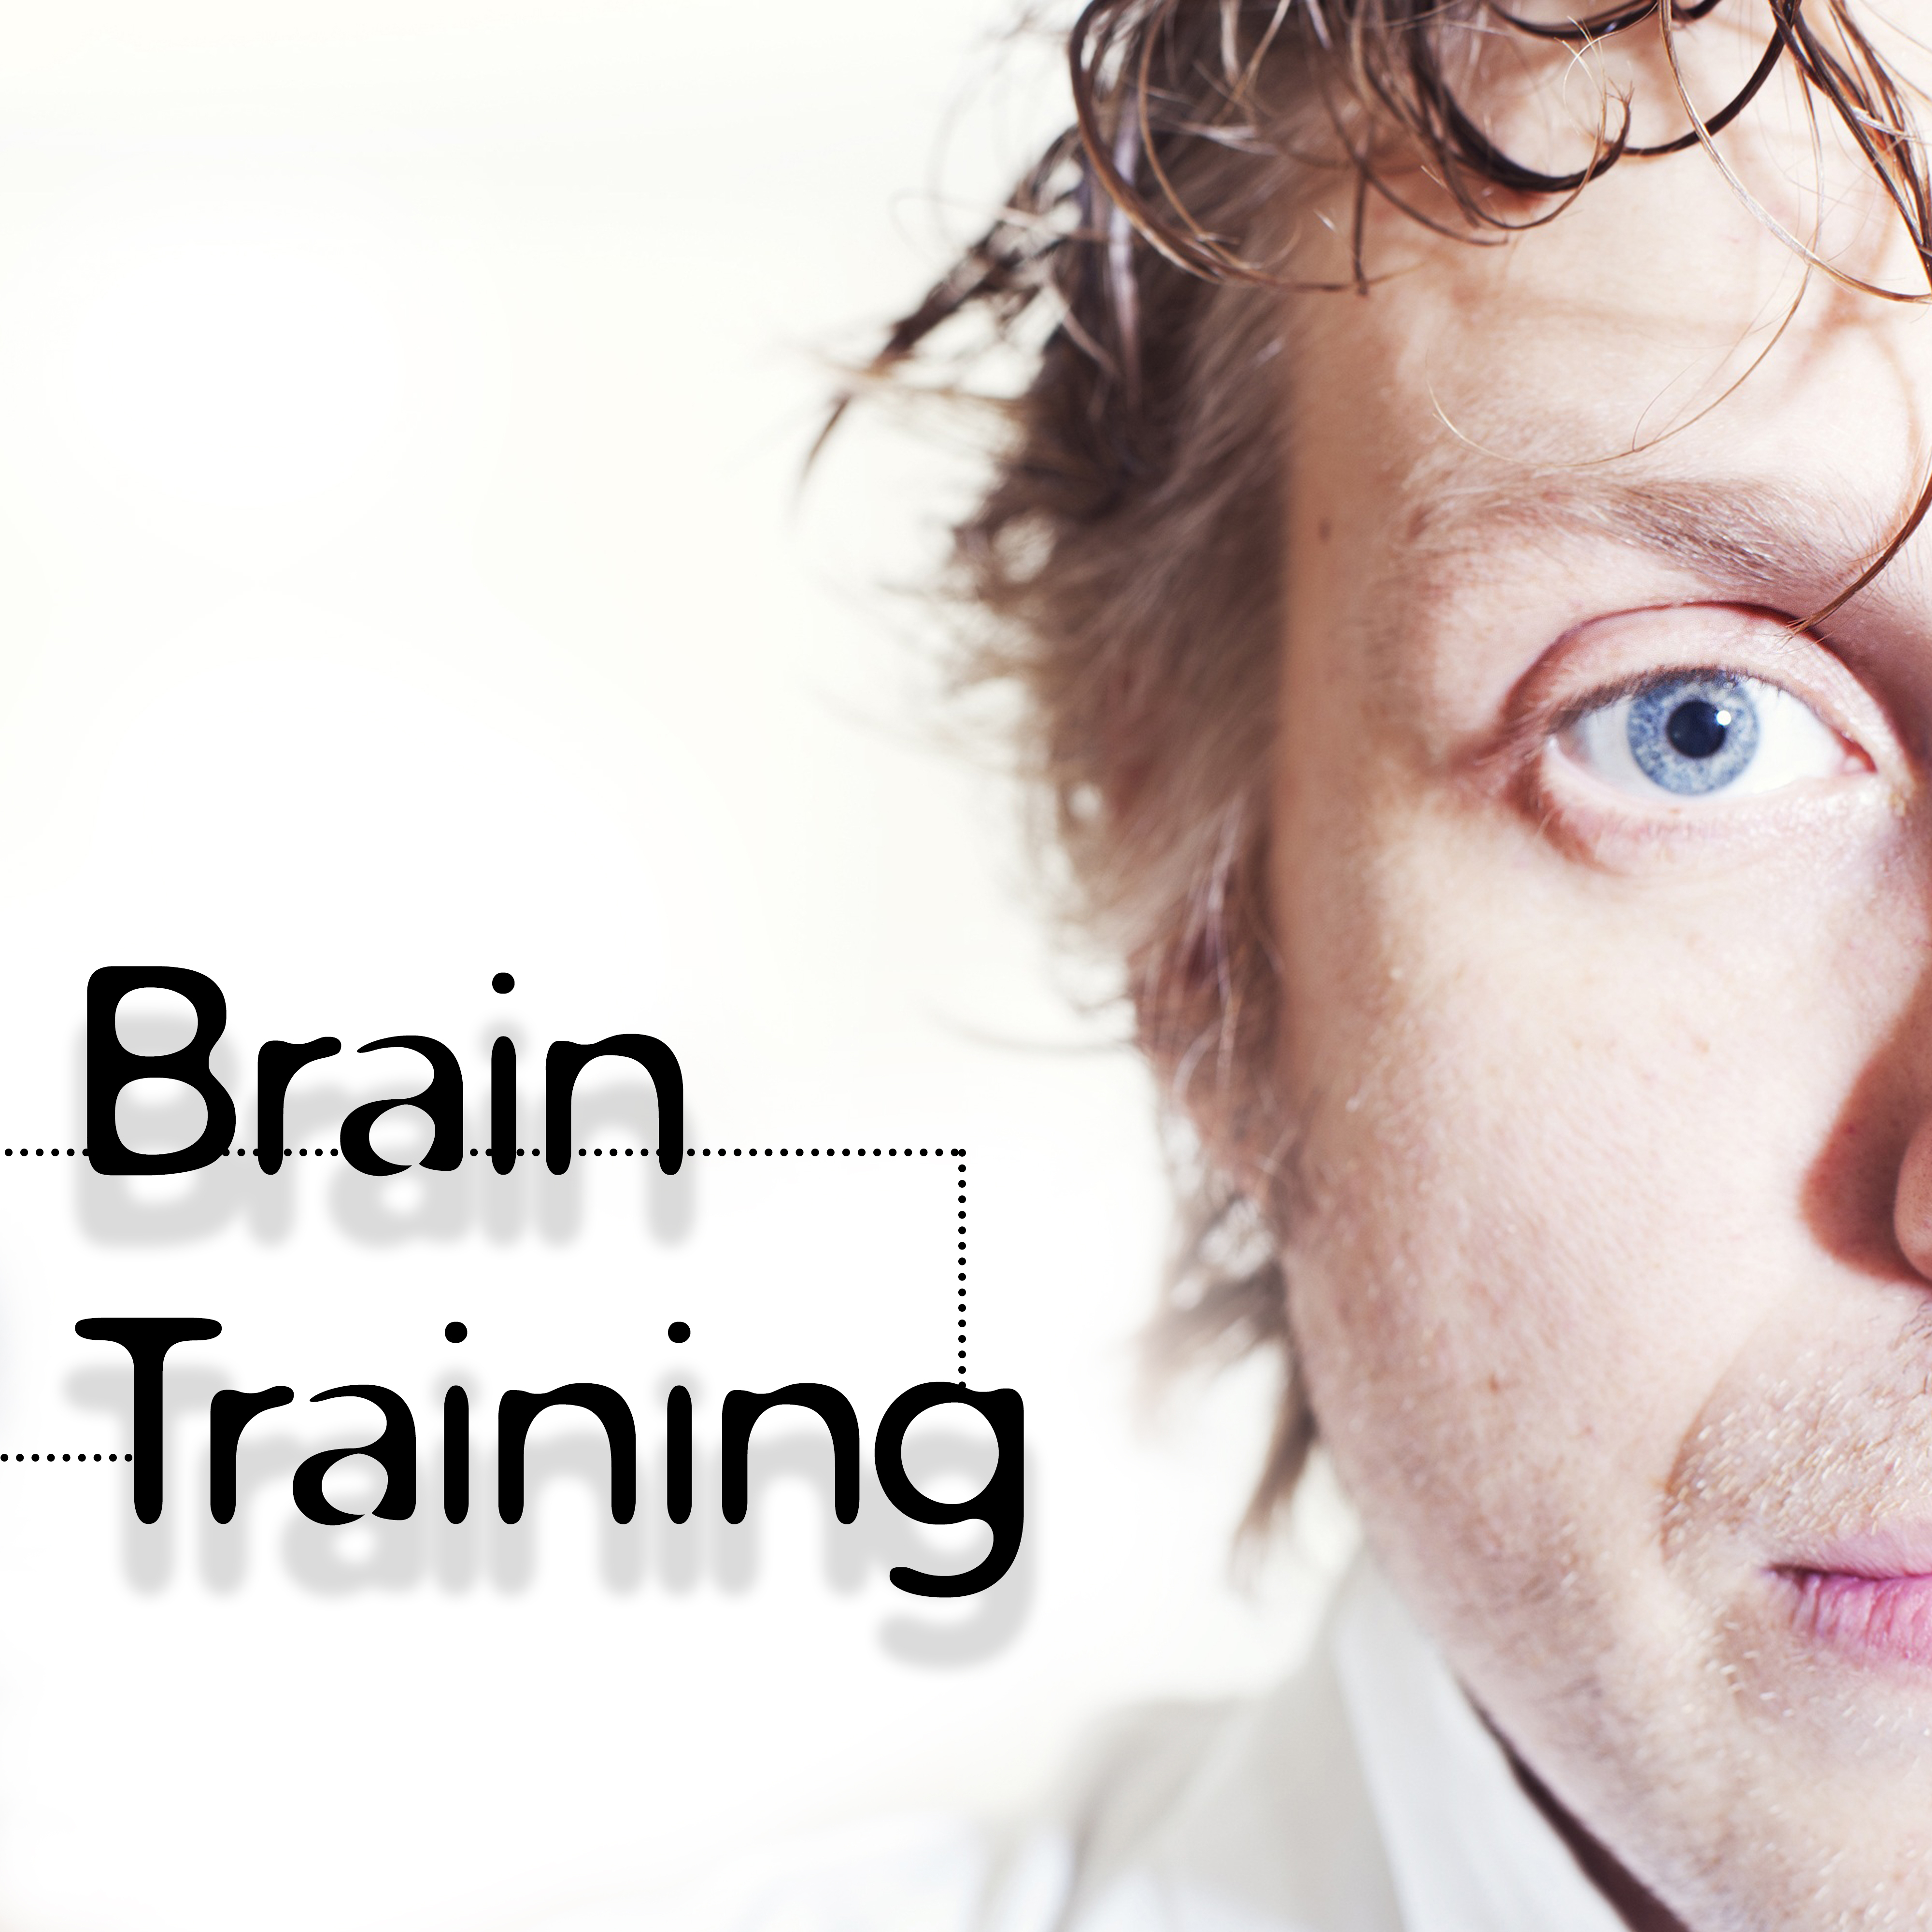 Brain Training – Best Music for Study, Deep Focus, Songs to Concentrate, Mozart, Beethoven